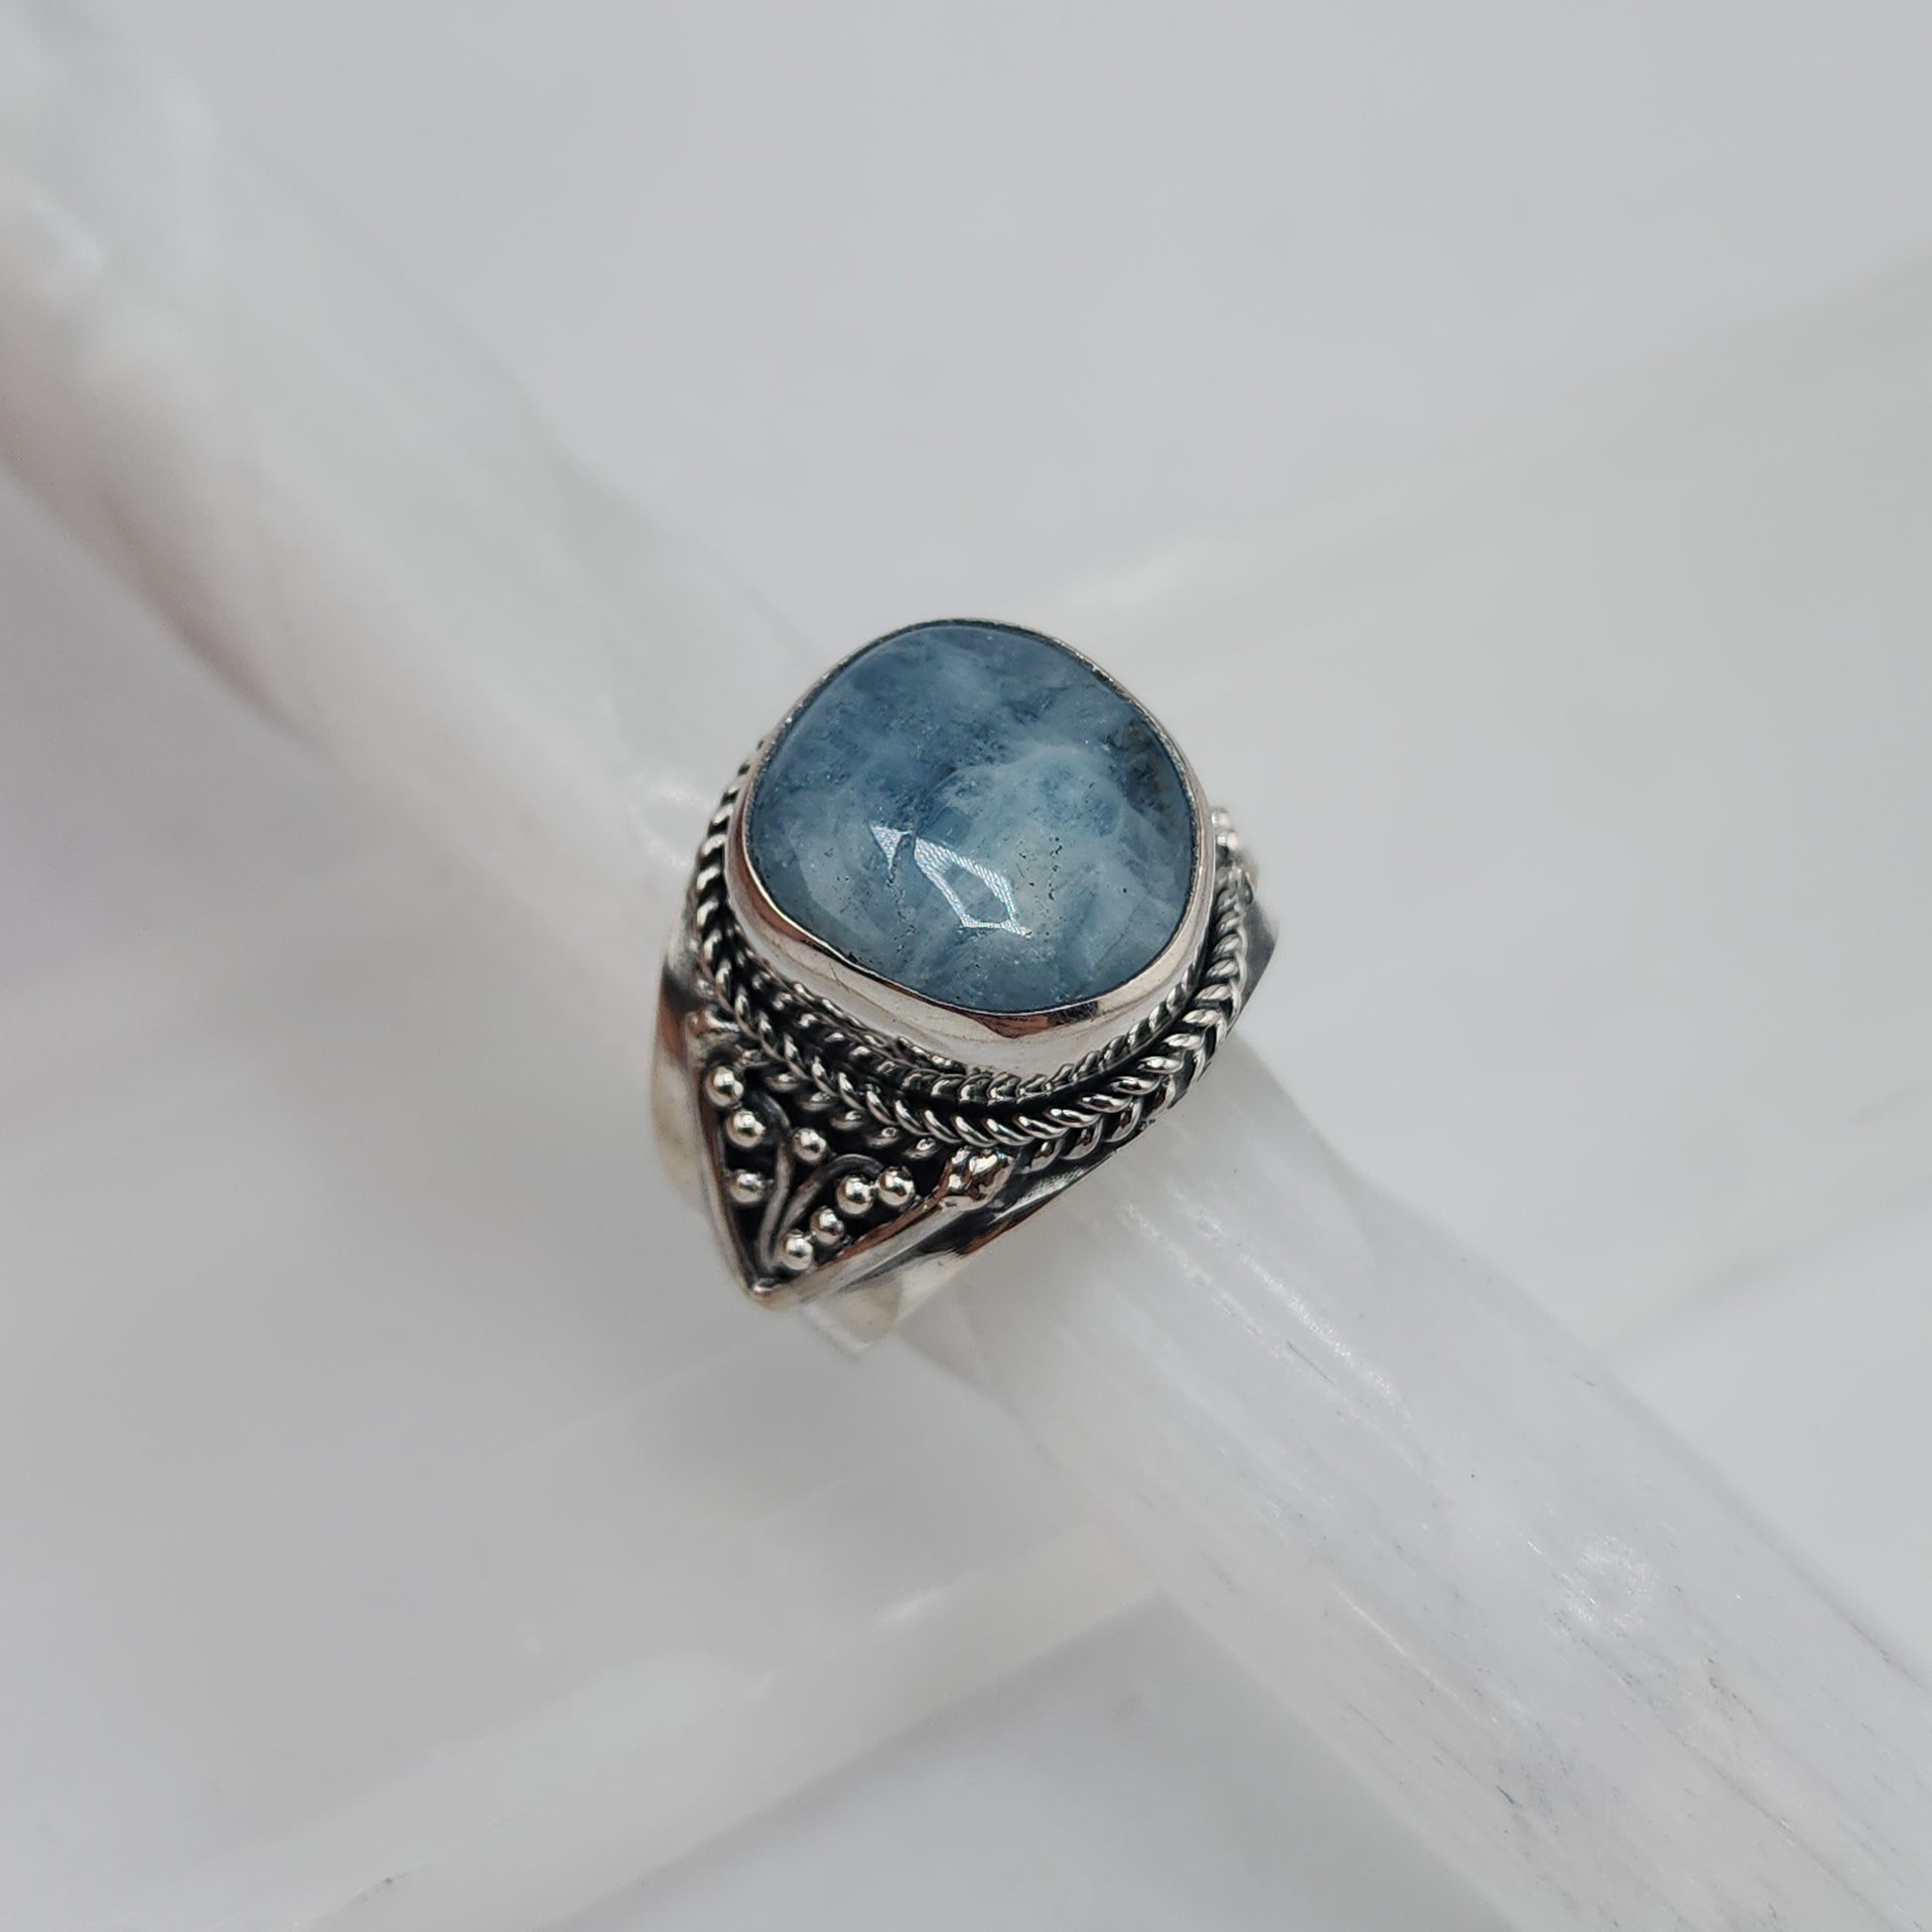 Sterling silver aquamarine ring designed by Shlomo available at wholesale and retail prices, only at our crystal shop in San Diego!